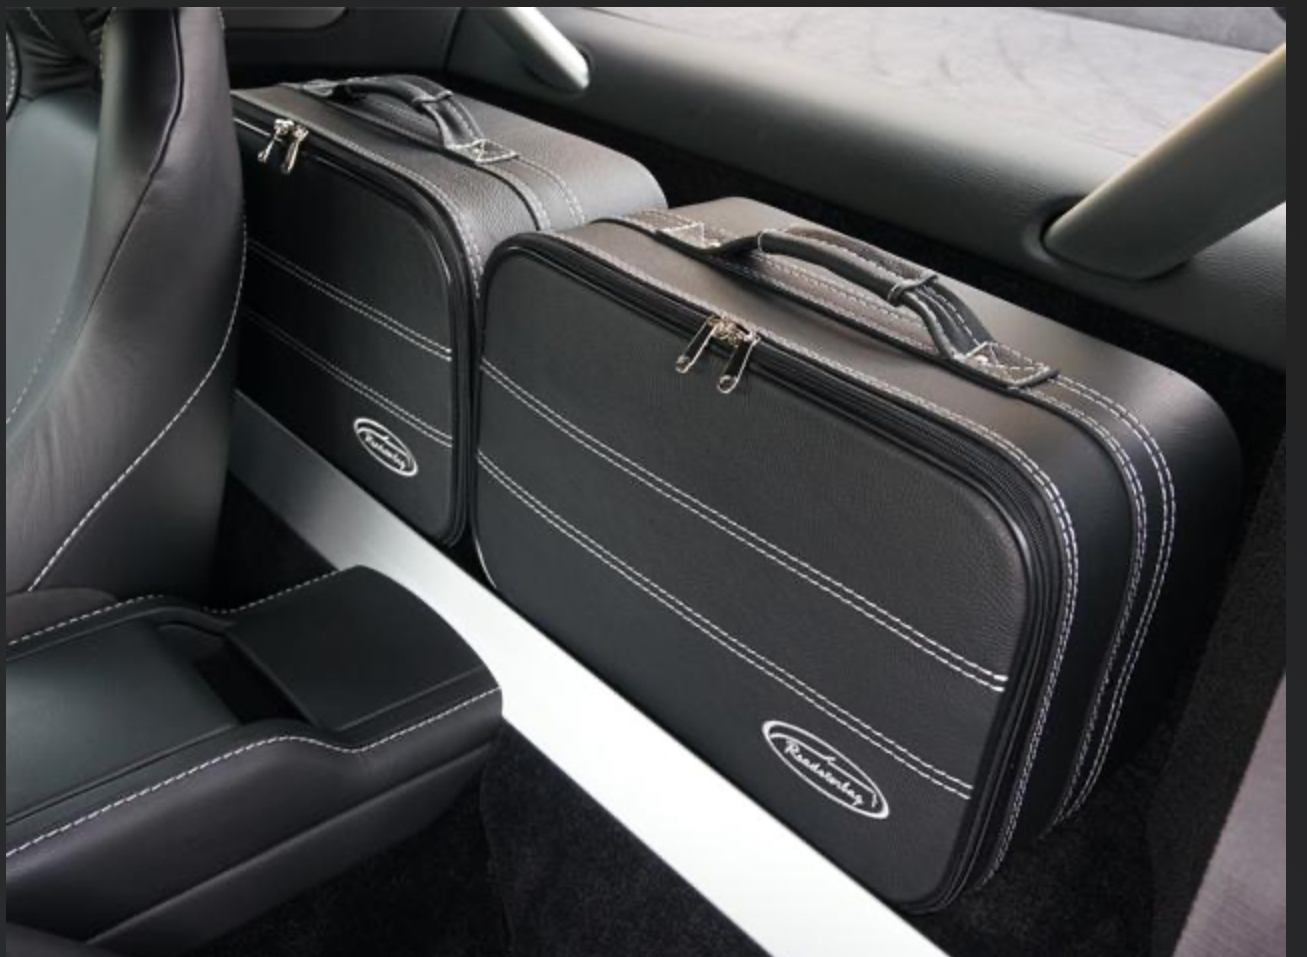 Pistonheads - The image shows a black briefcase sitting in the back of an SUV. There are two cases, one larger and one smaller, both with white piping on them. The interior of the car has a clean look with a black center console and leather seats. On the right side of the photo, there is a luggage rack mounted to the vehicle's roof. The image has a watermark with what appears to be an address or website URL.